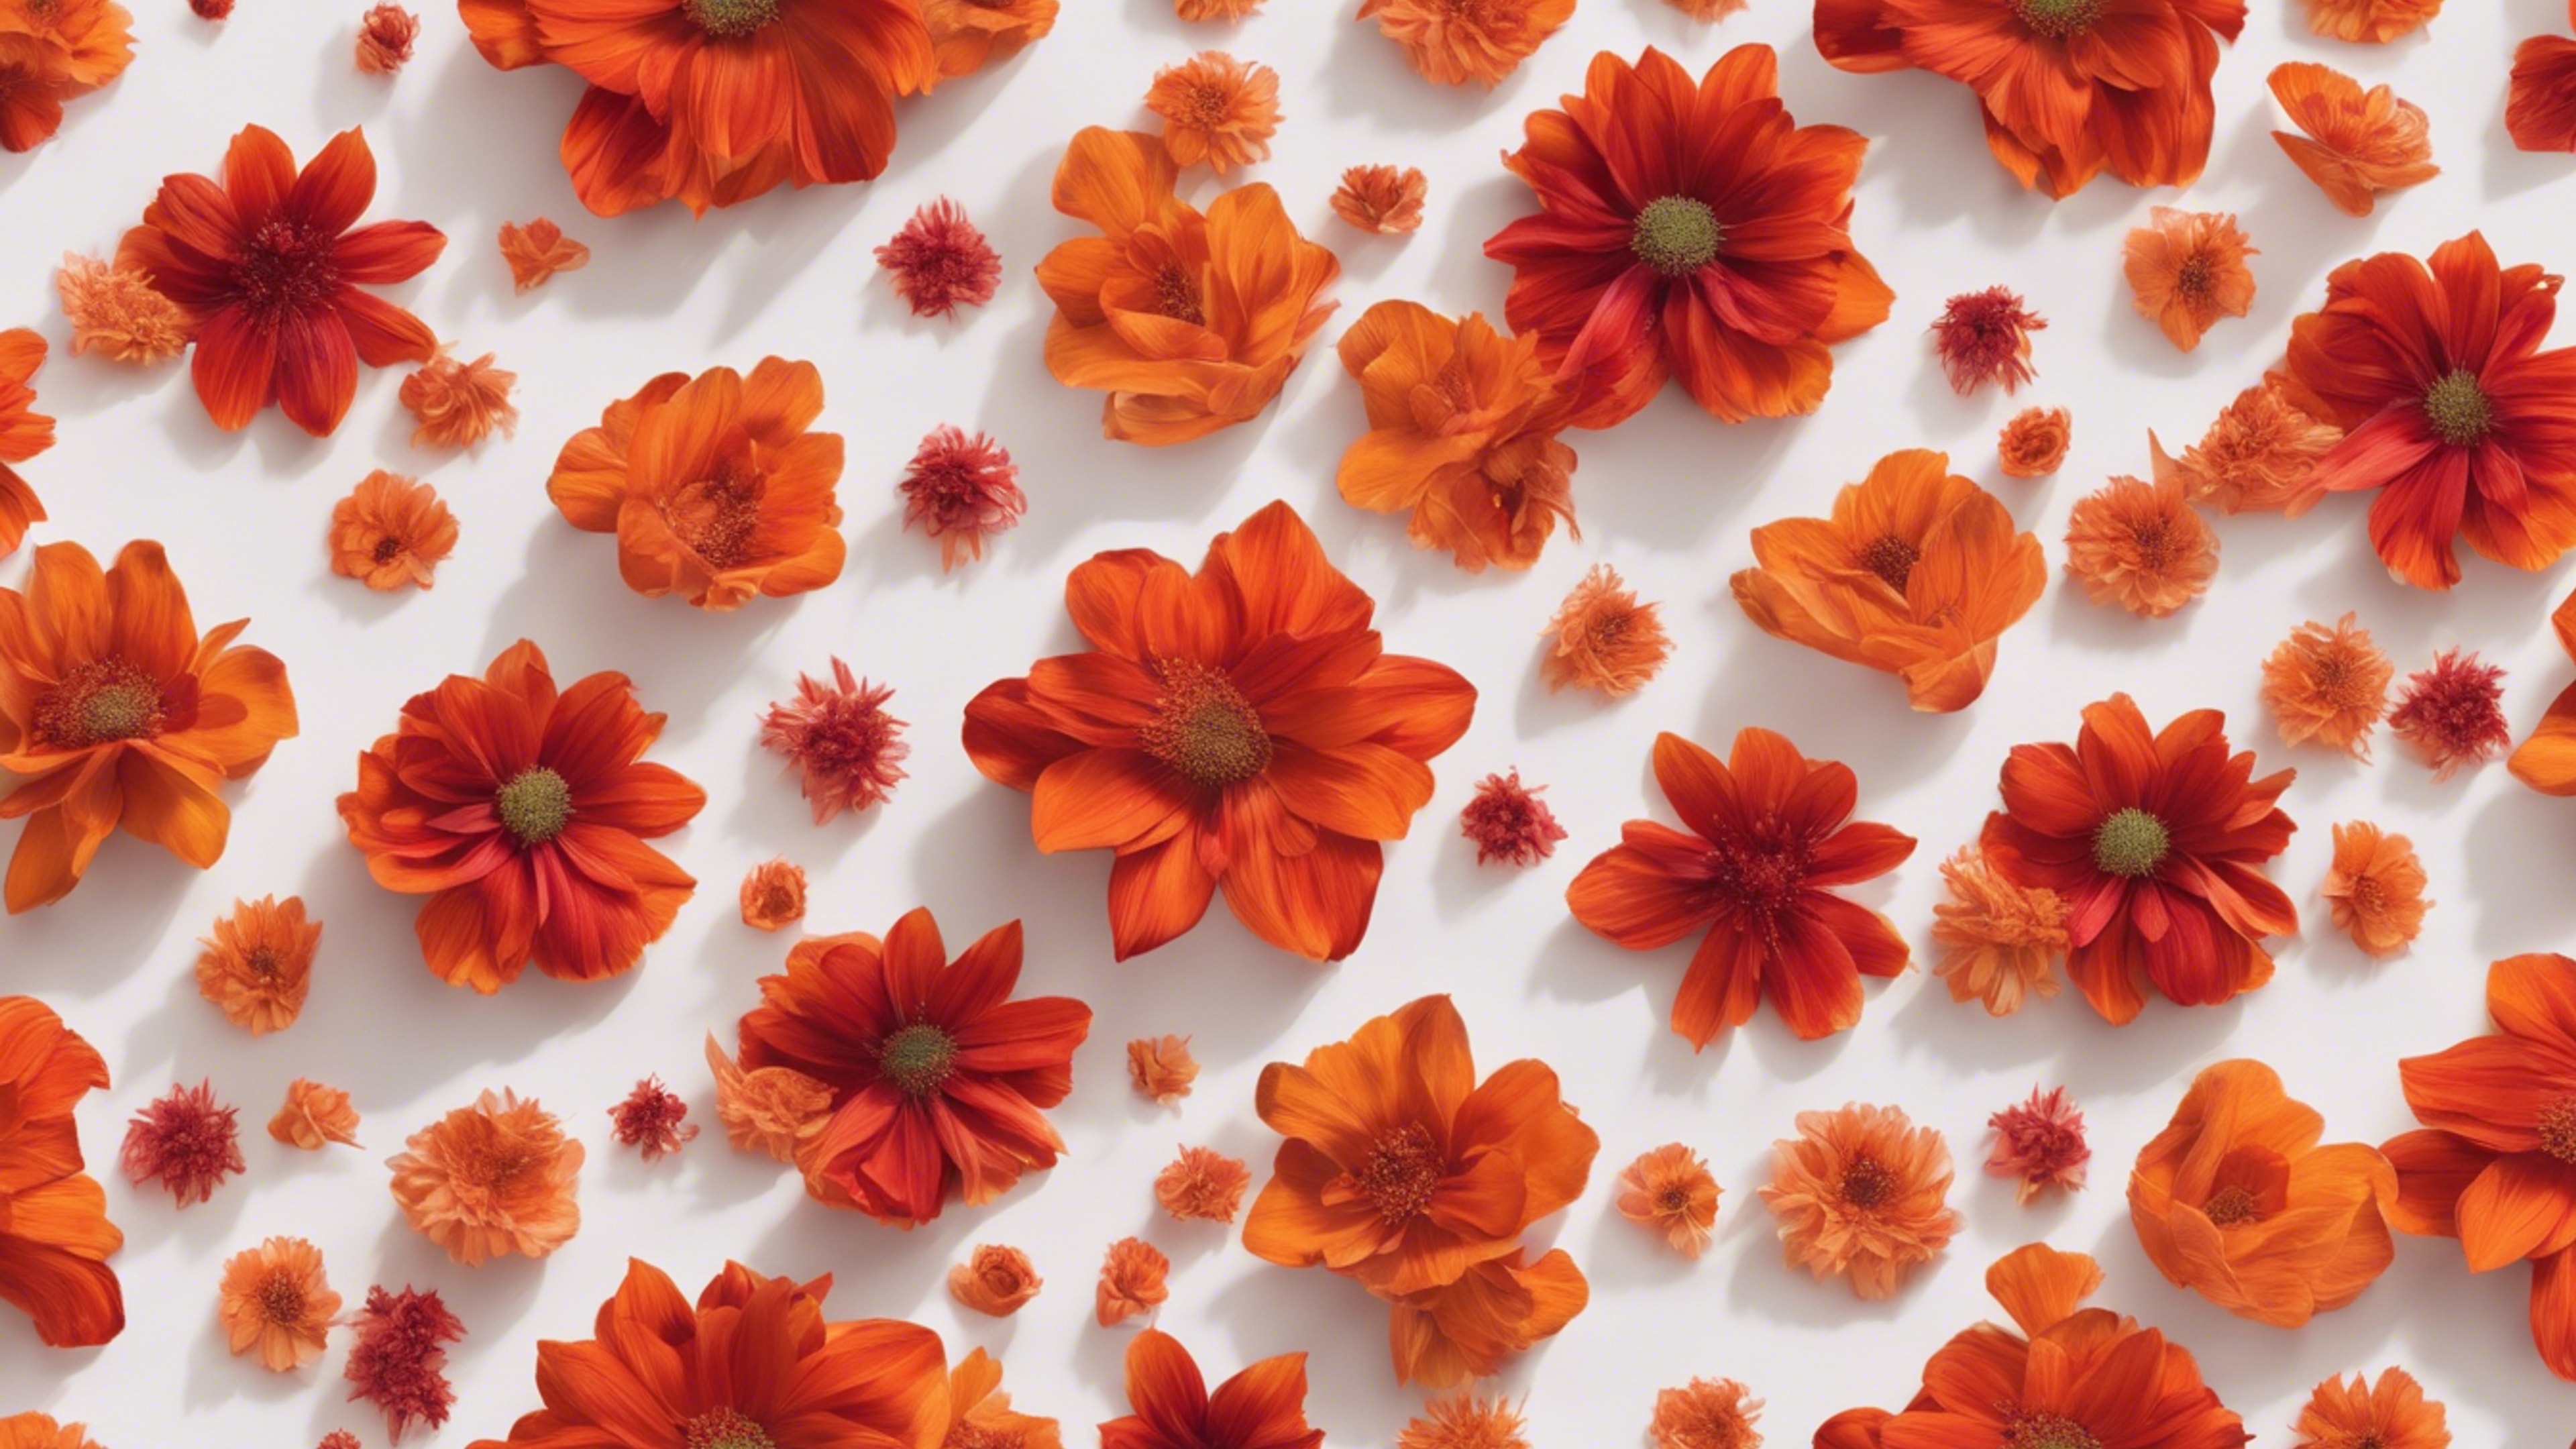 Vibrantly swirling patterns of red and orange flowers that consist of delicate petals and leaves in a seamless layout. Ფონი[1a3317c1e5234fee8b43]